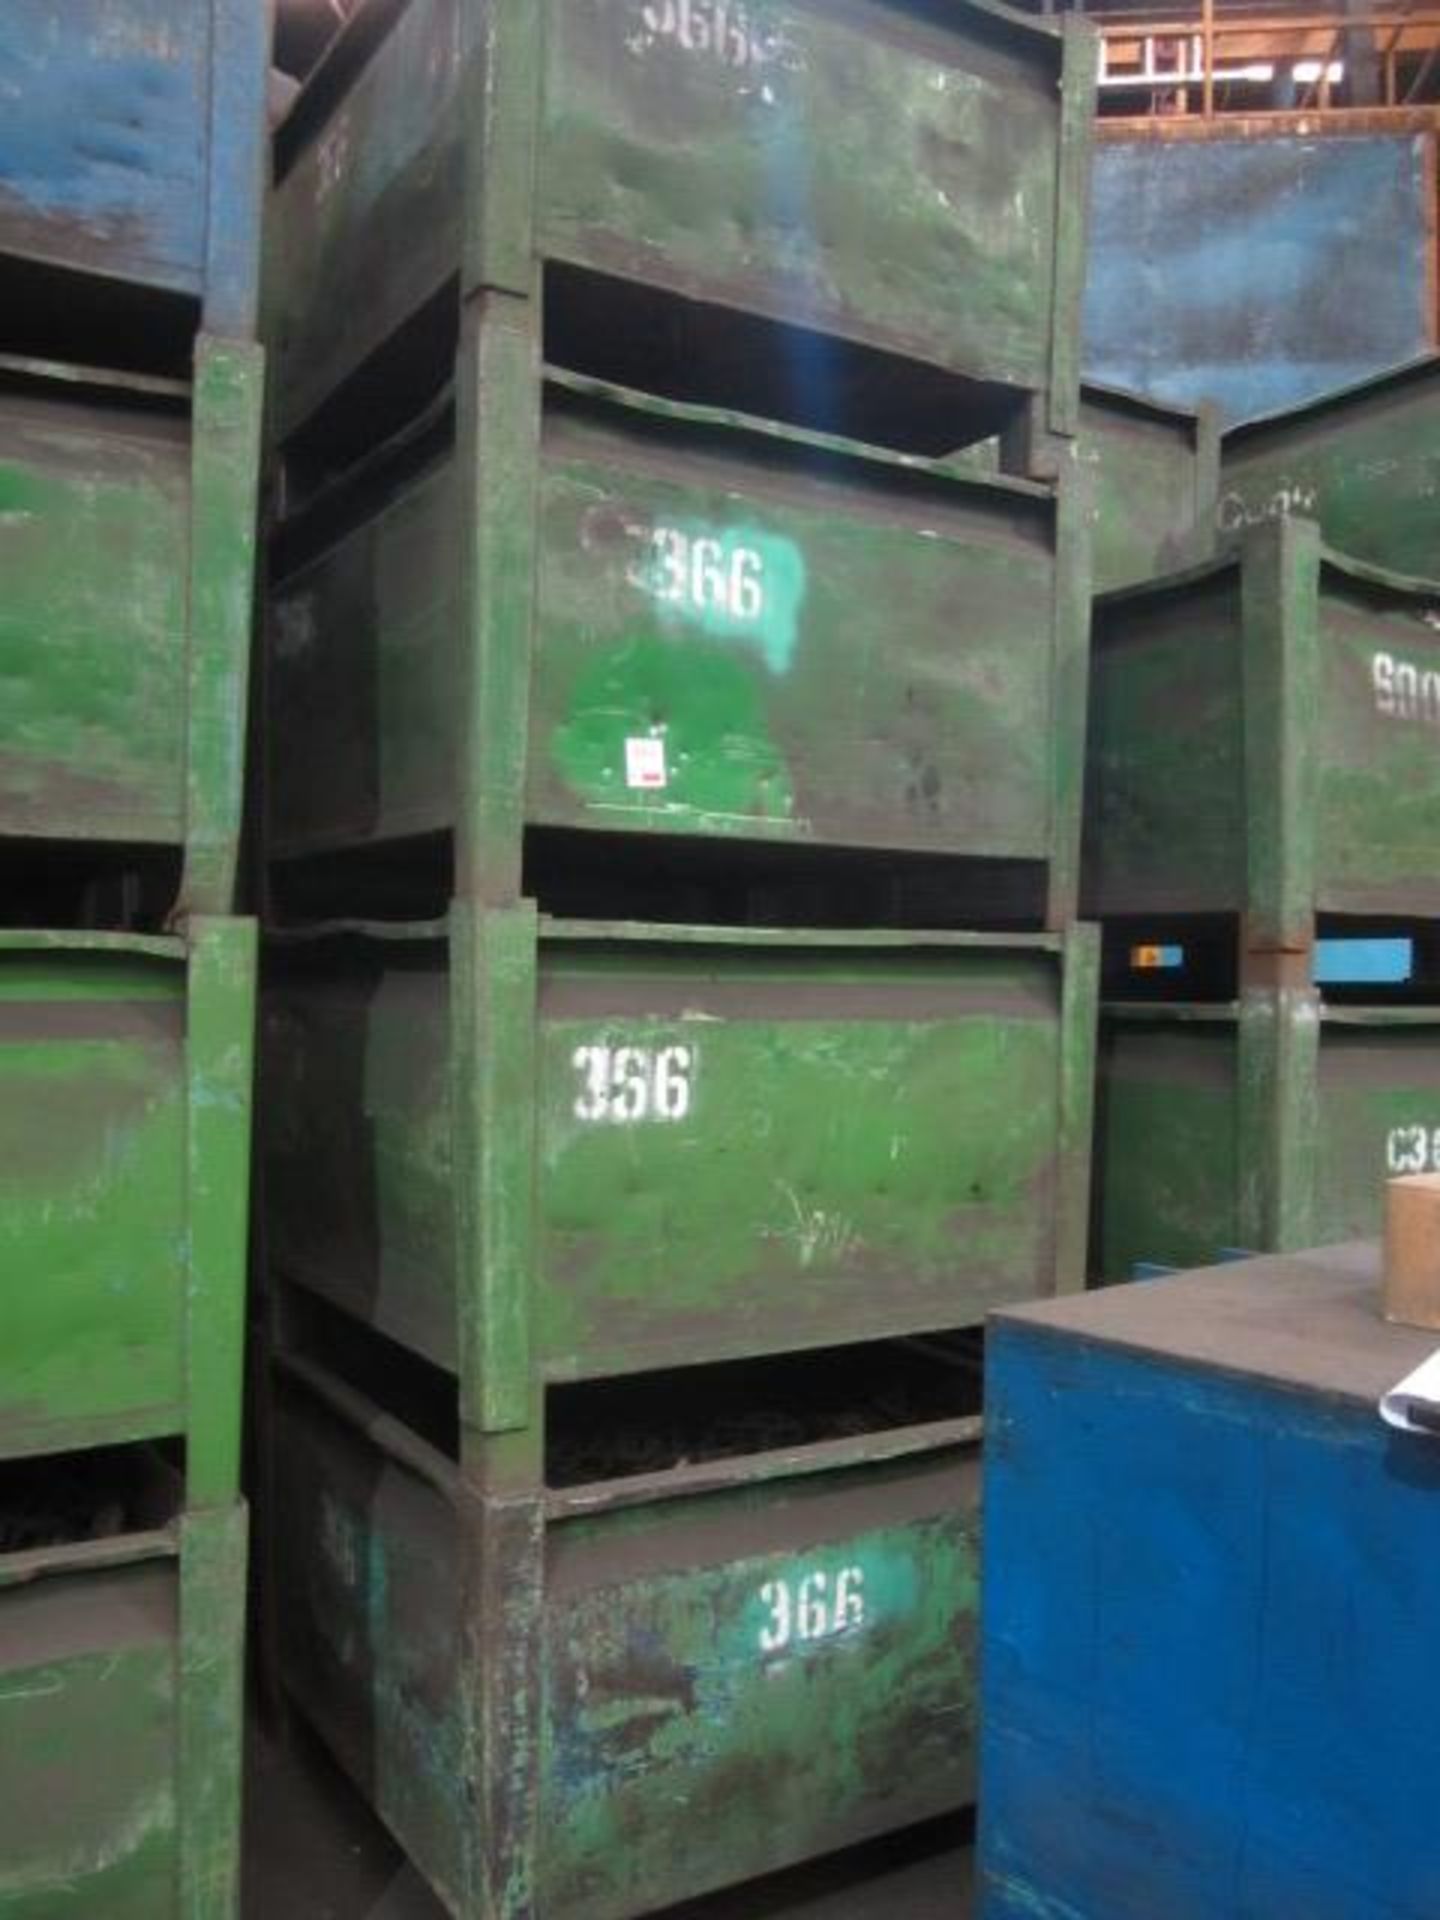 Four metal forkliftable stacking storage bins, approx. size 48"x48"x34", excluding contents